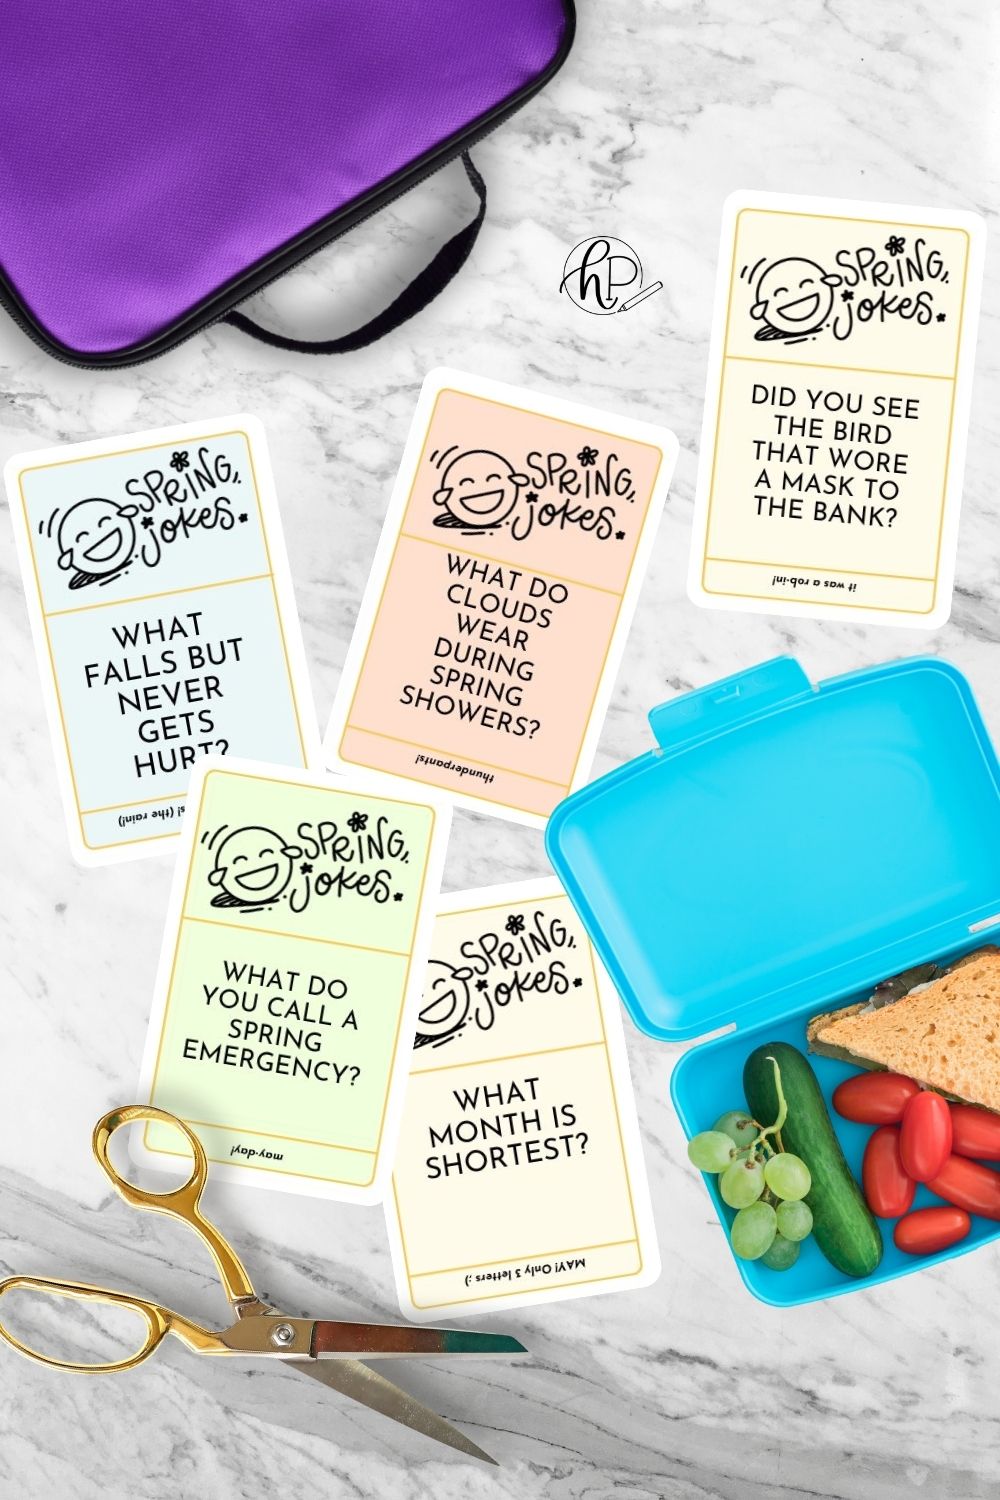 image of lunchbox and lunch packing on marble countertop with joke cards cut to size. joke cards printed in color with hand lettered title, illustrated laughing face emoji and easy to read jokes for kids.